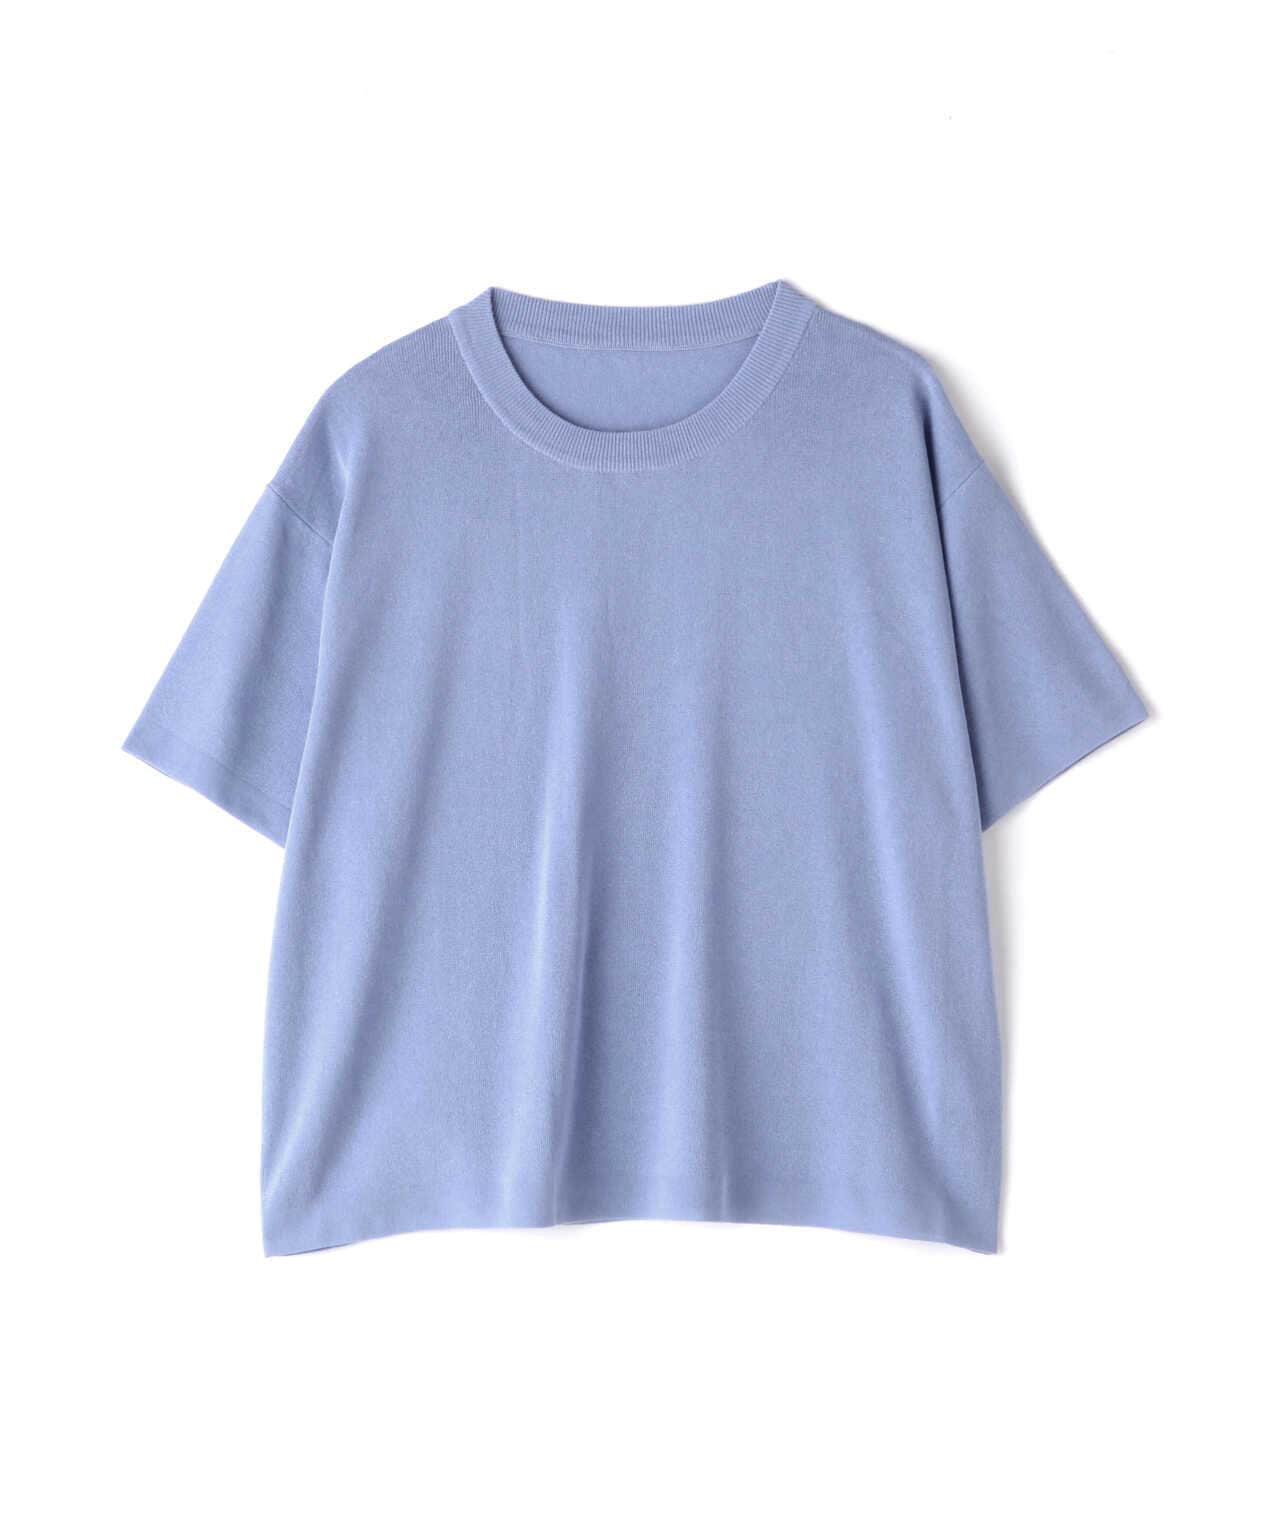 crepuscule /クレプスキュール/Exclusive Knit Tee/別注ニットティー